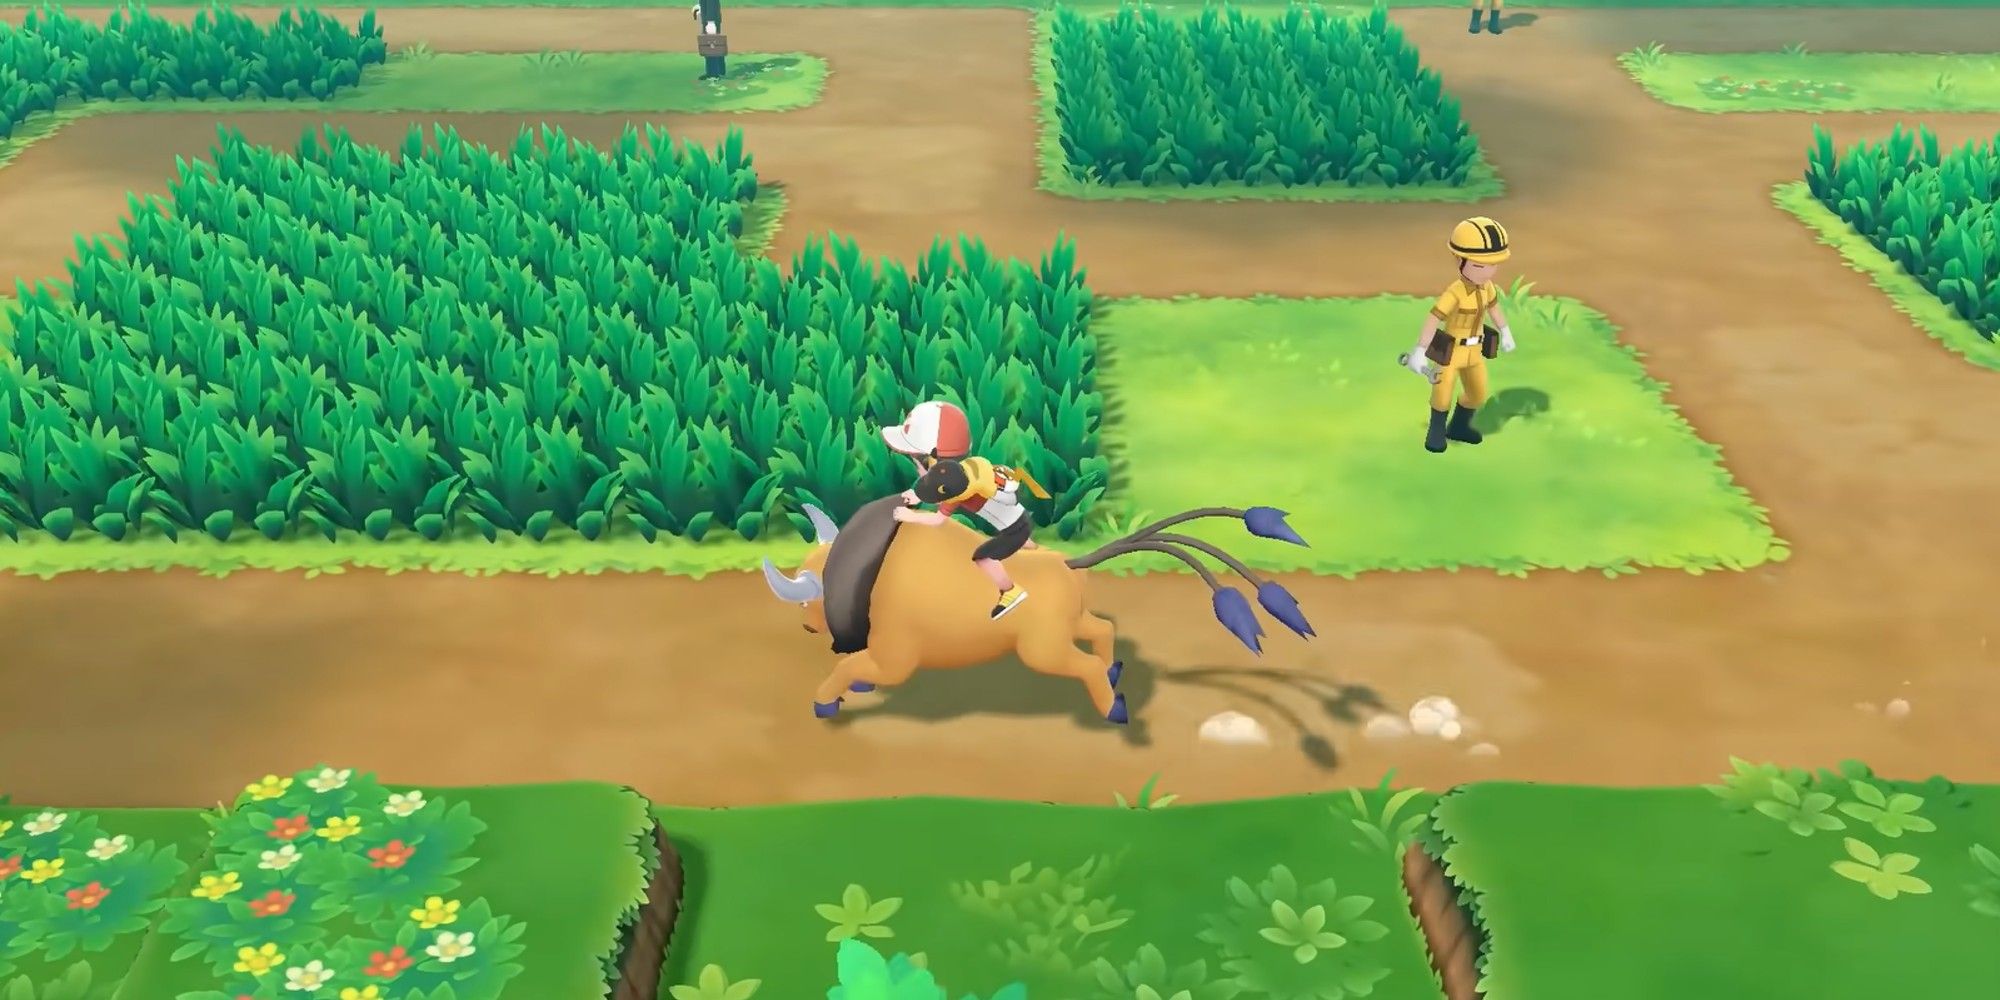 Tauros from Pokemon Let's Go Eevee & Let's Go Pikachu, running in Route 11